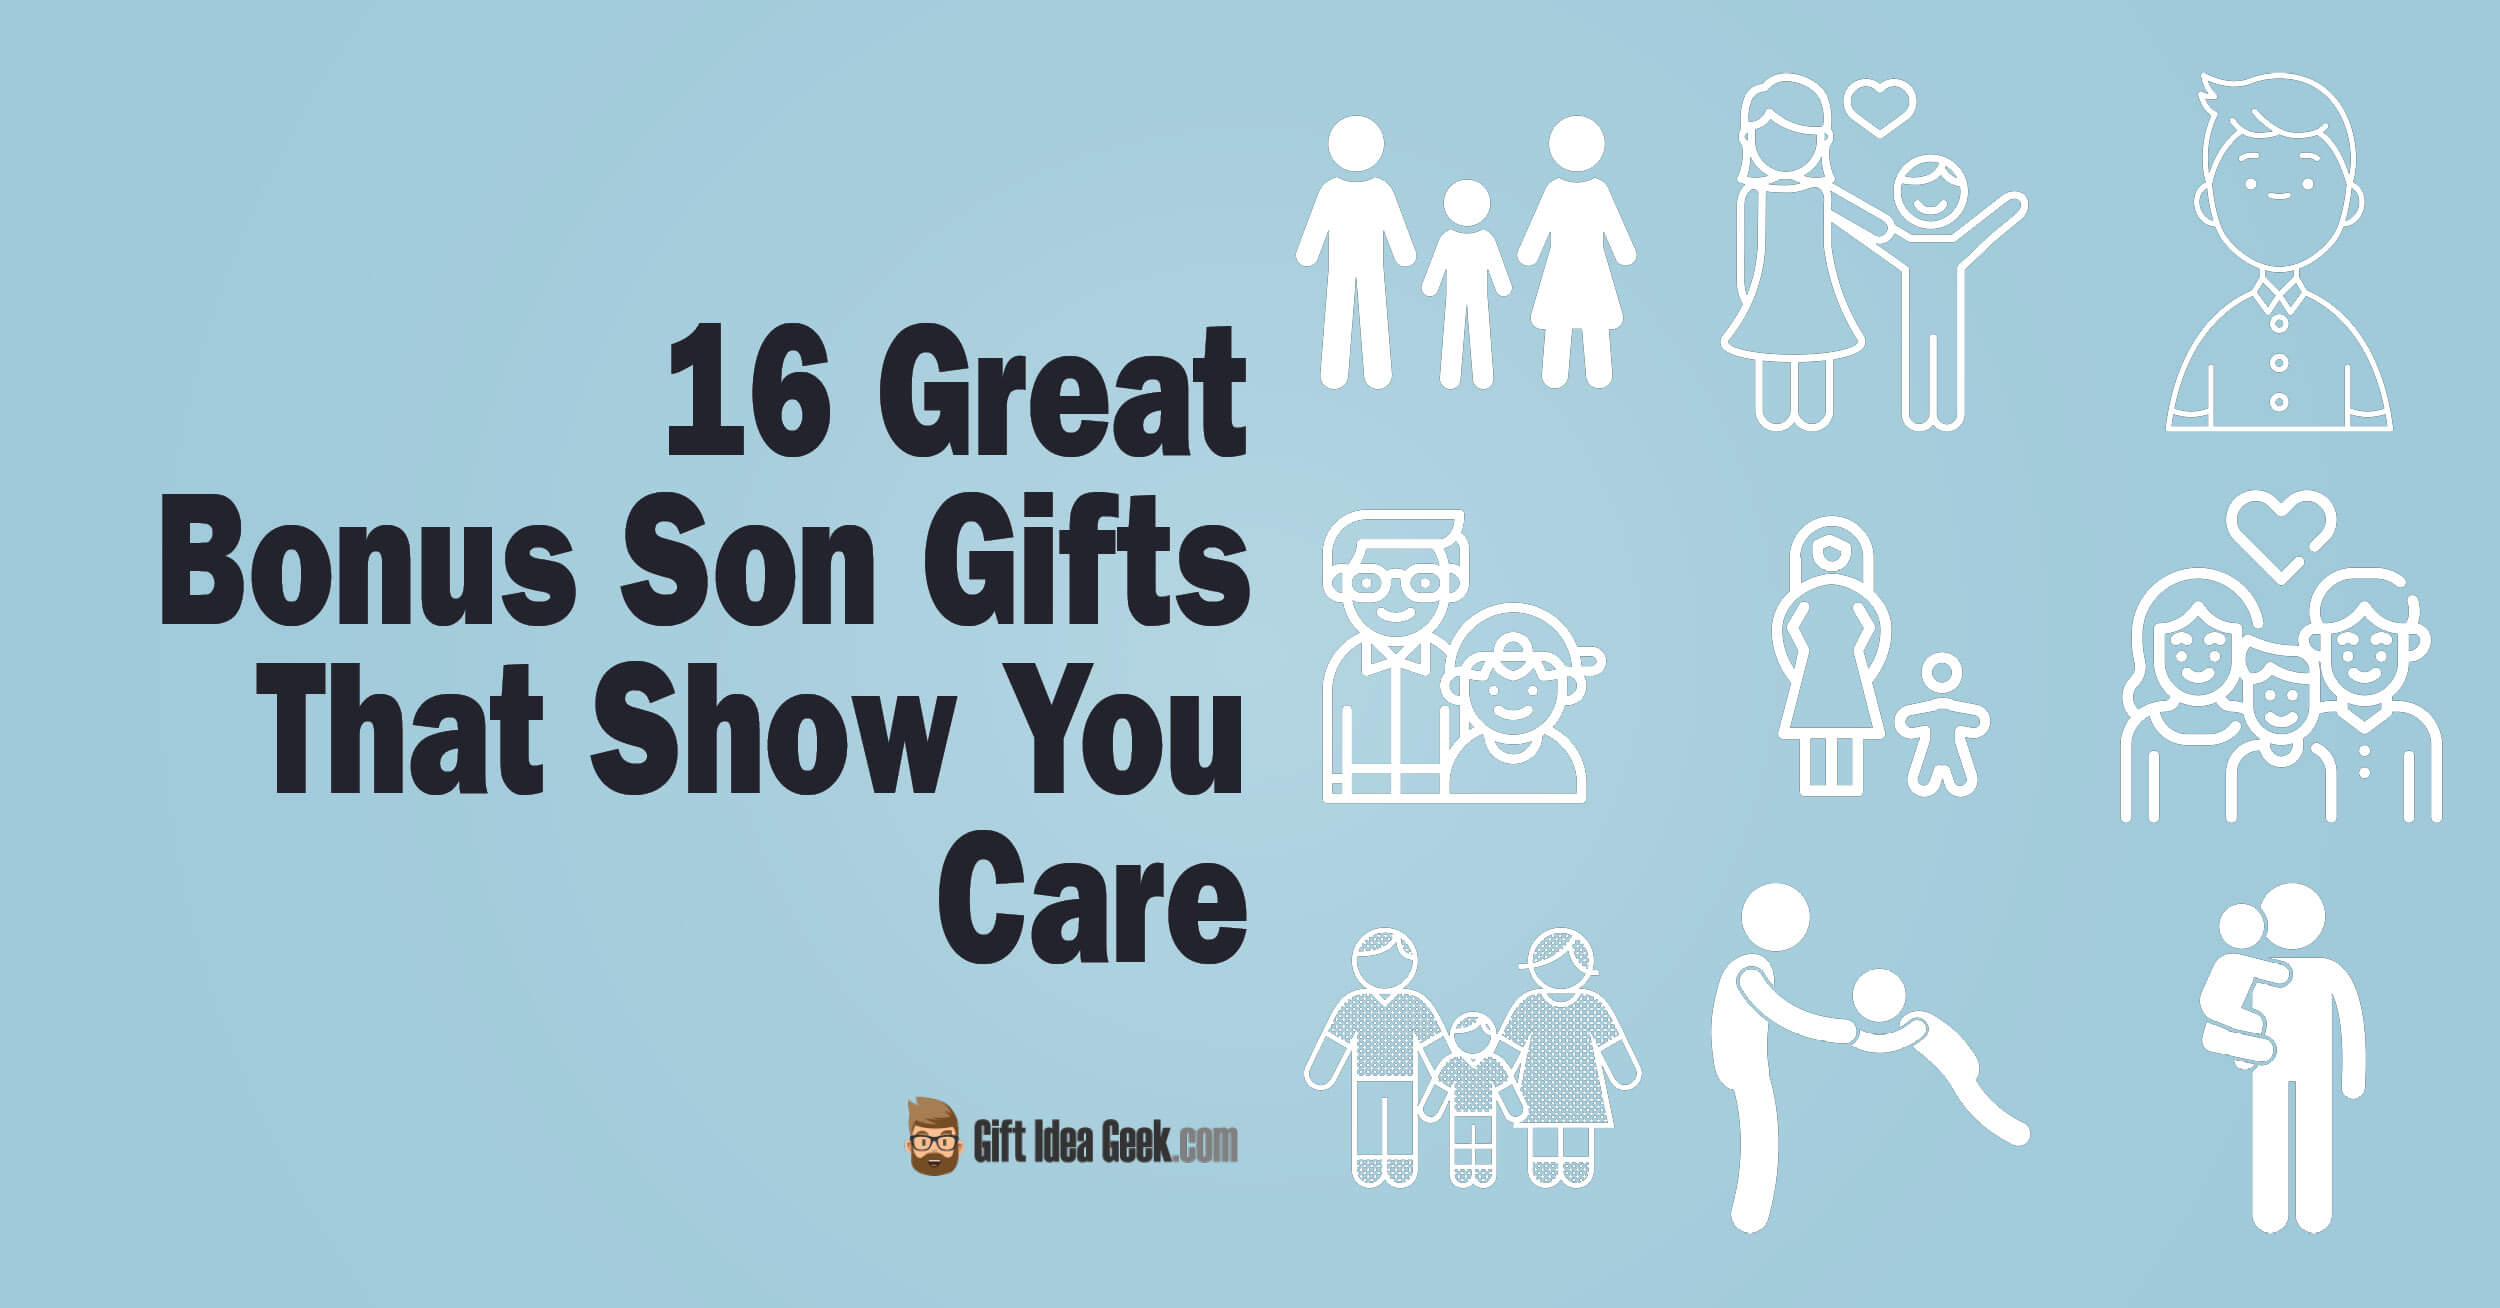 16 Great Bonus Son Gifts That Show You Care